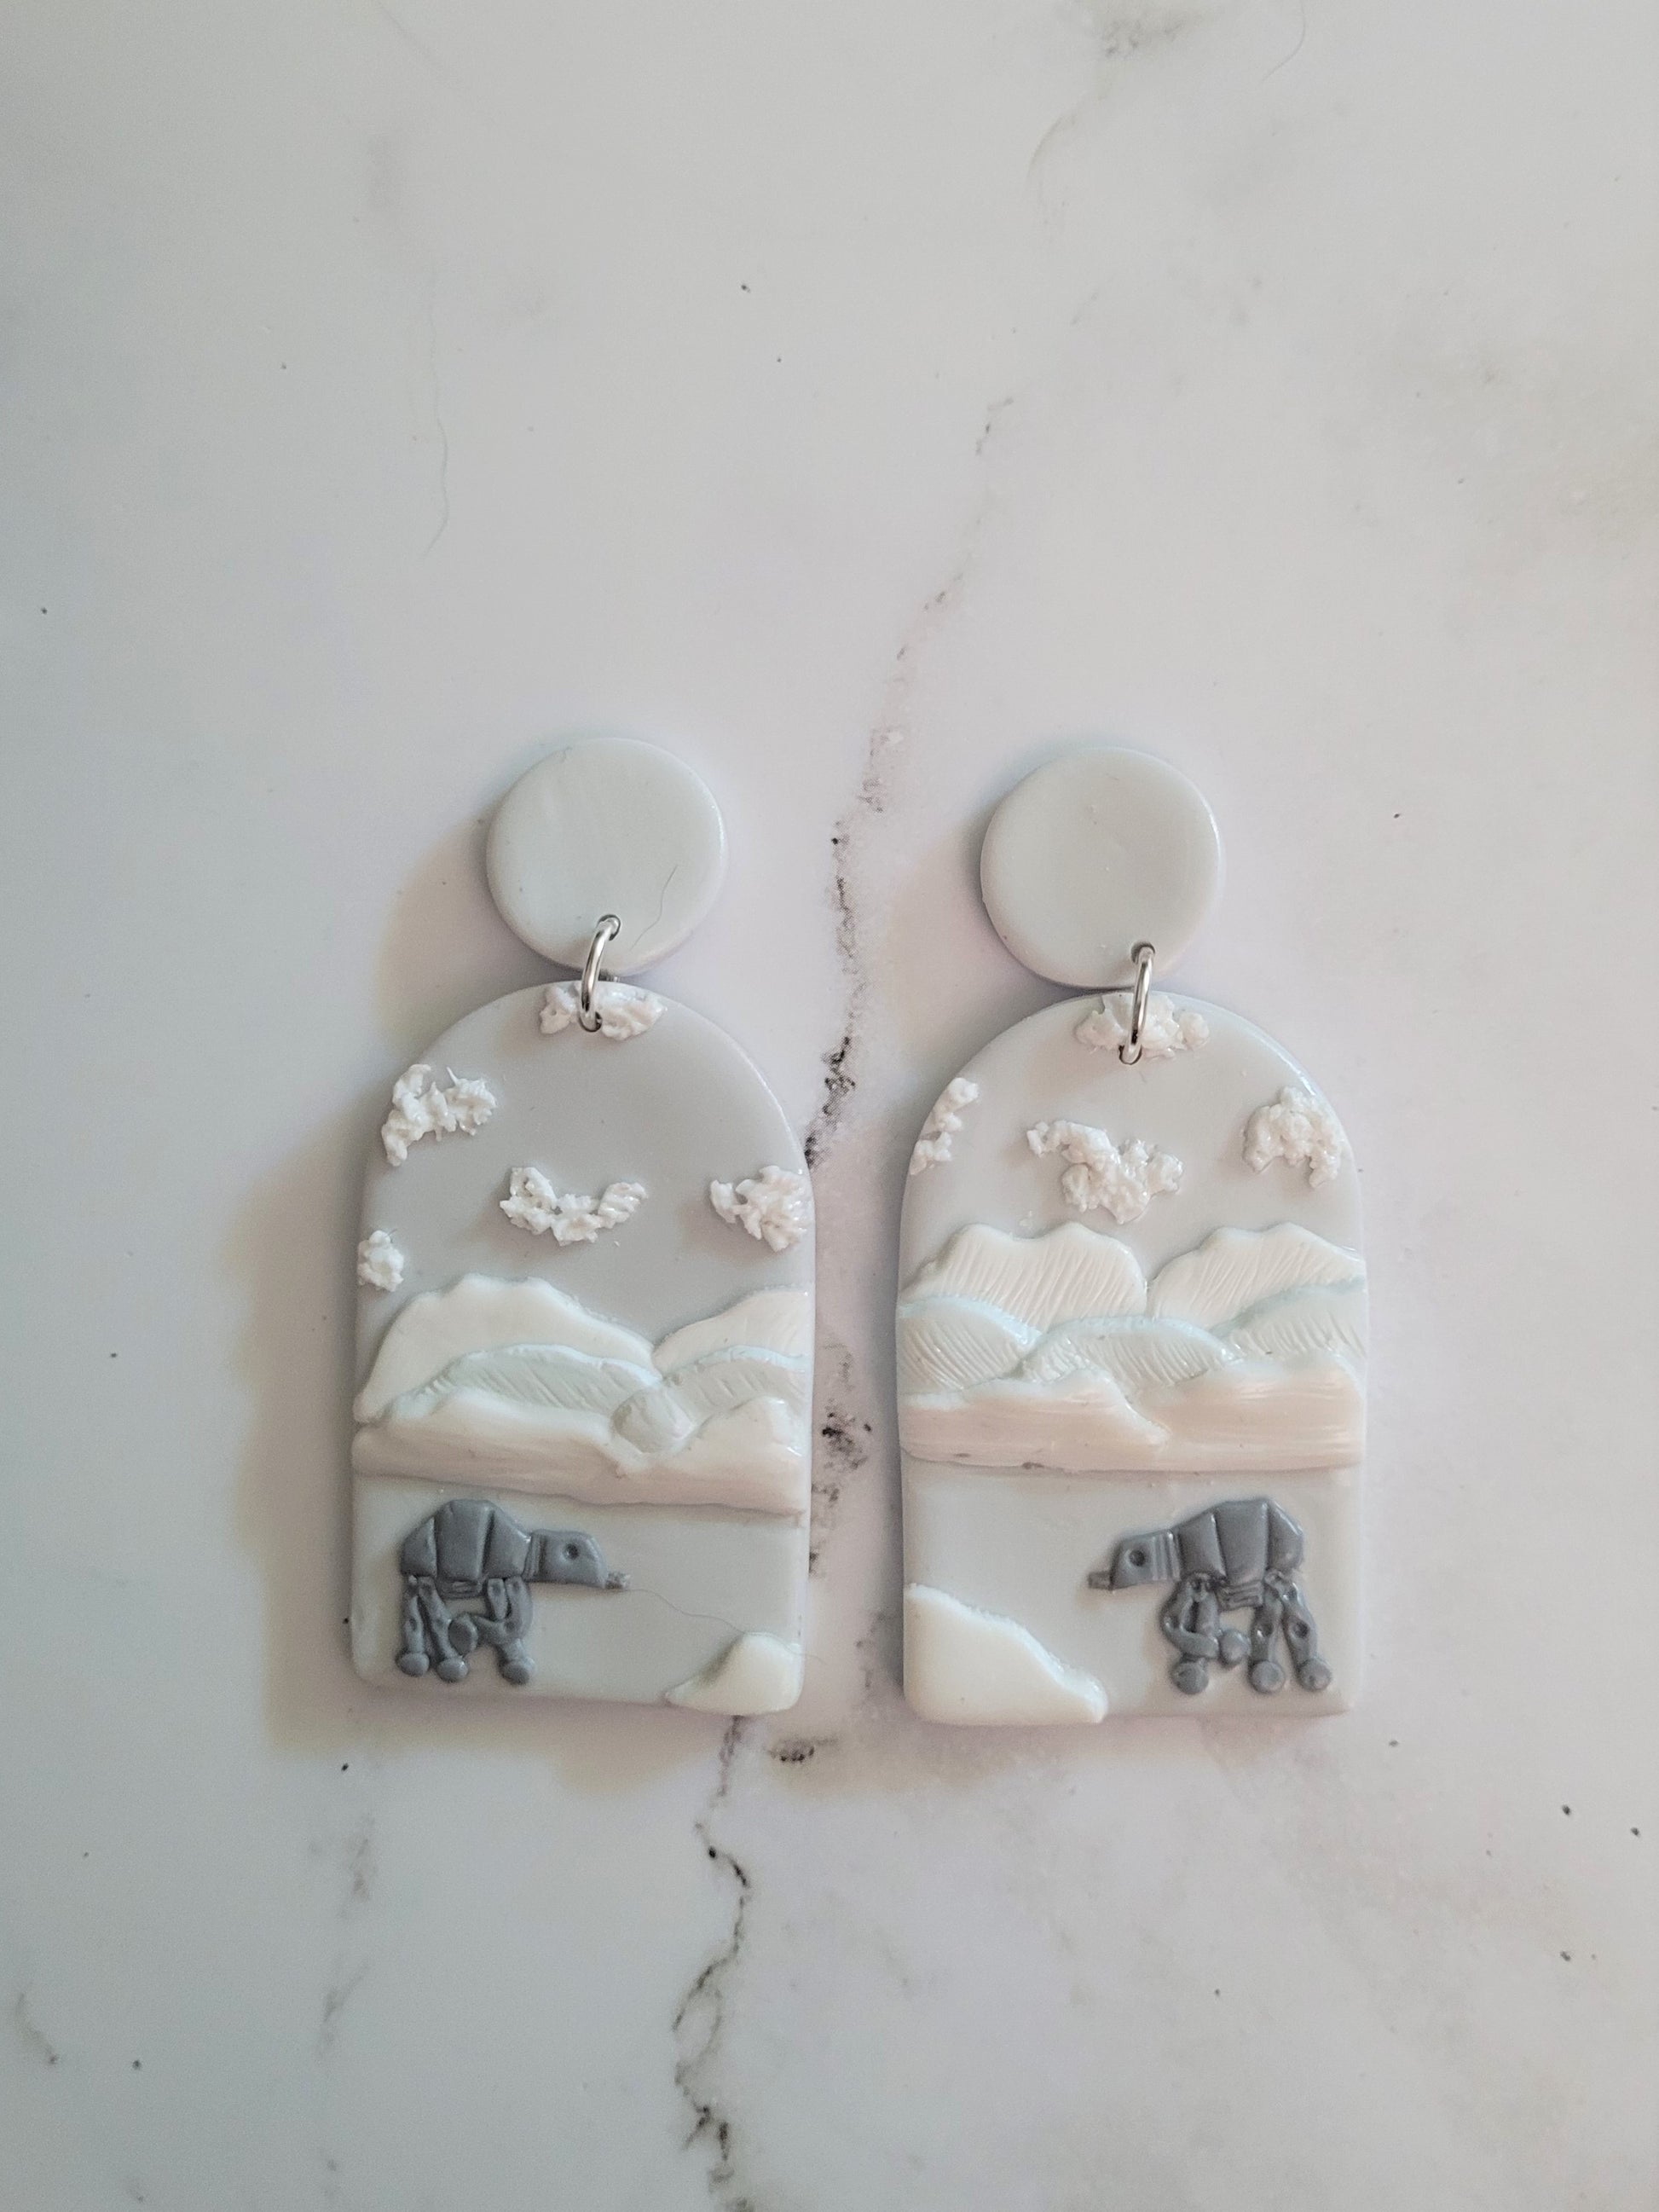 Closeup of Arch earrings with a icy landscape